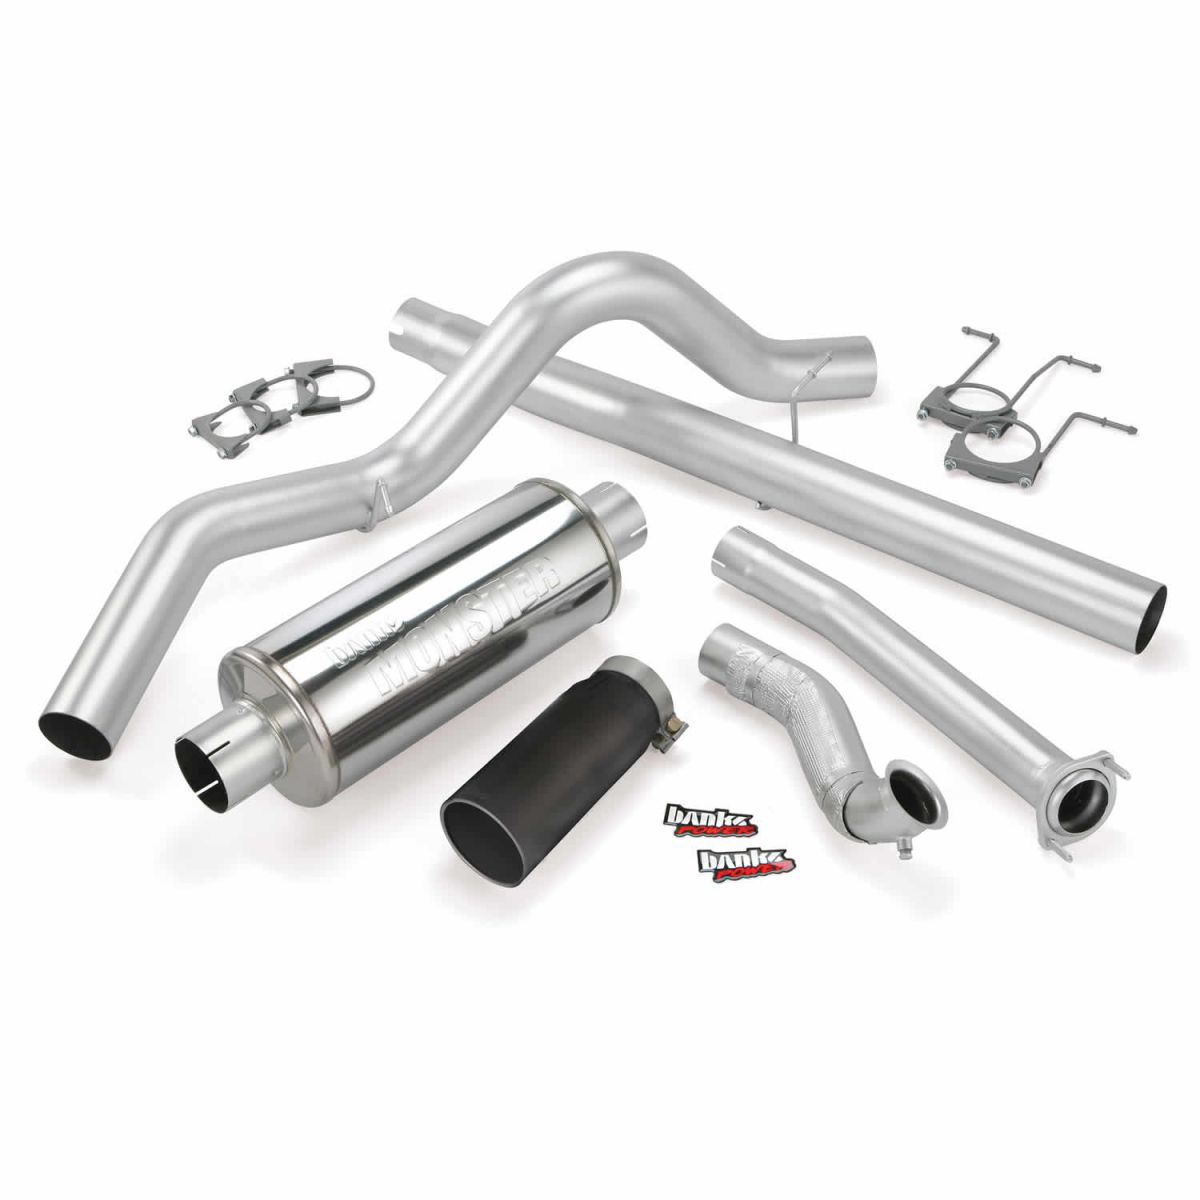 Banks Power - Banks Power Monster Exhaust System Single Exit Black Tip 94-97 Ford 7.3L ECLB